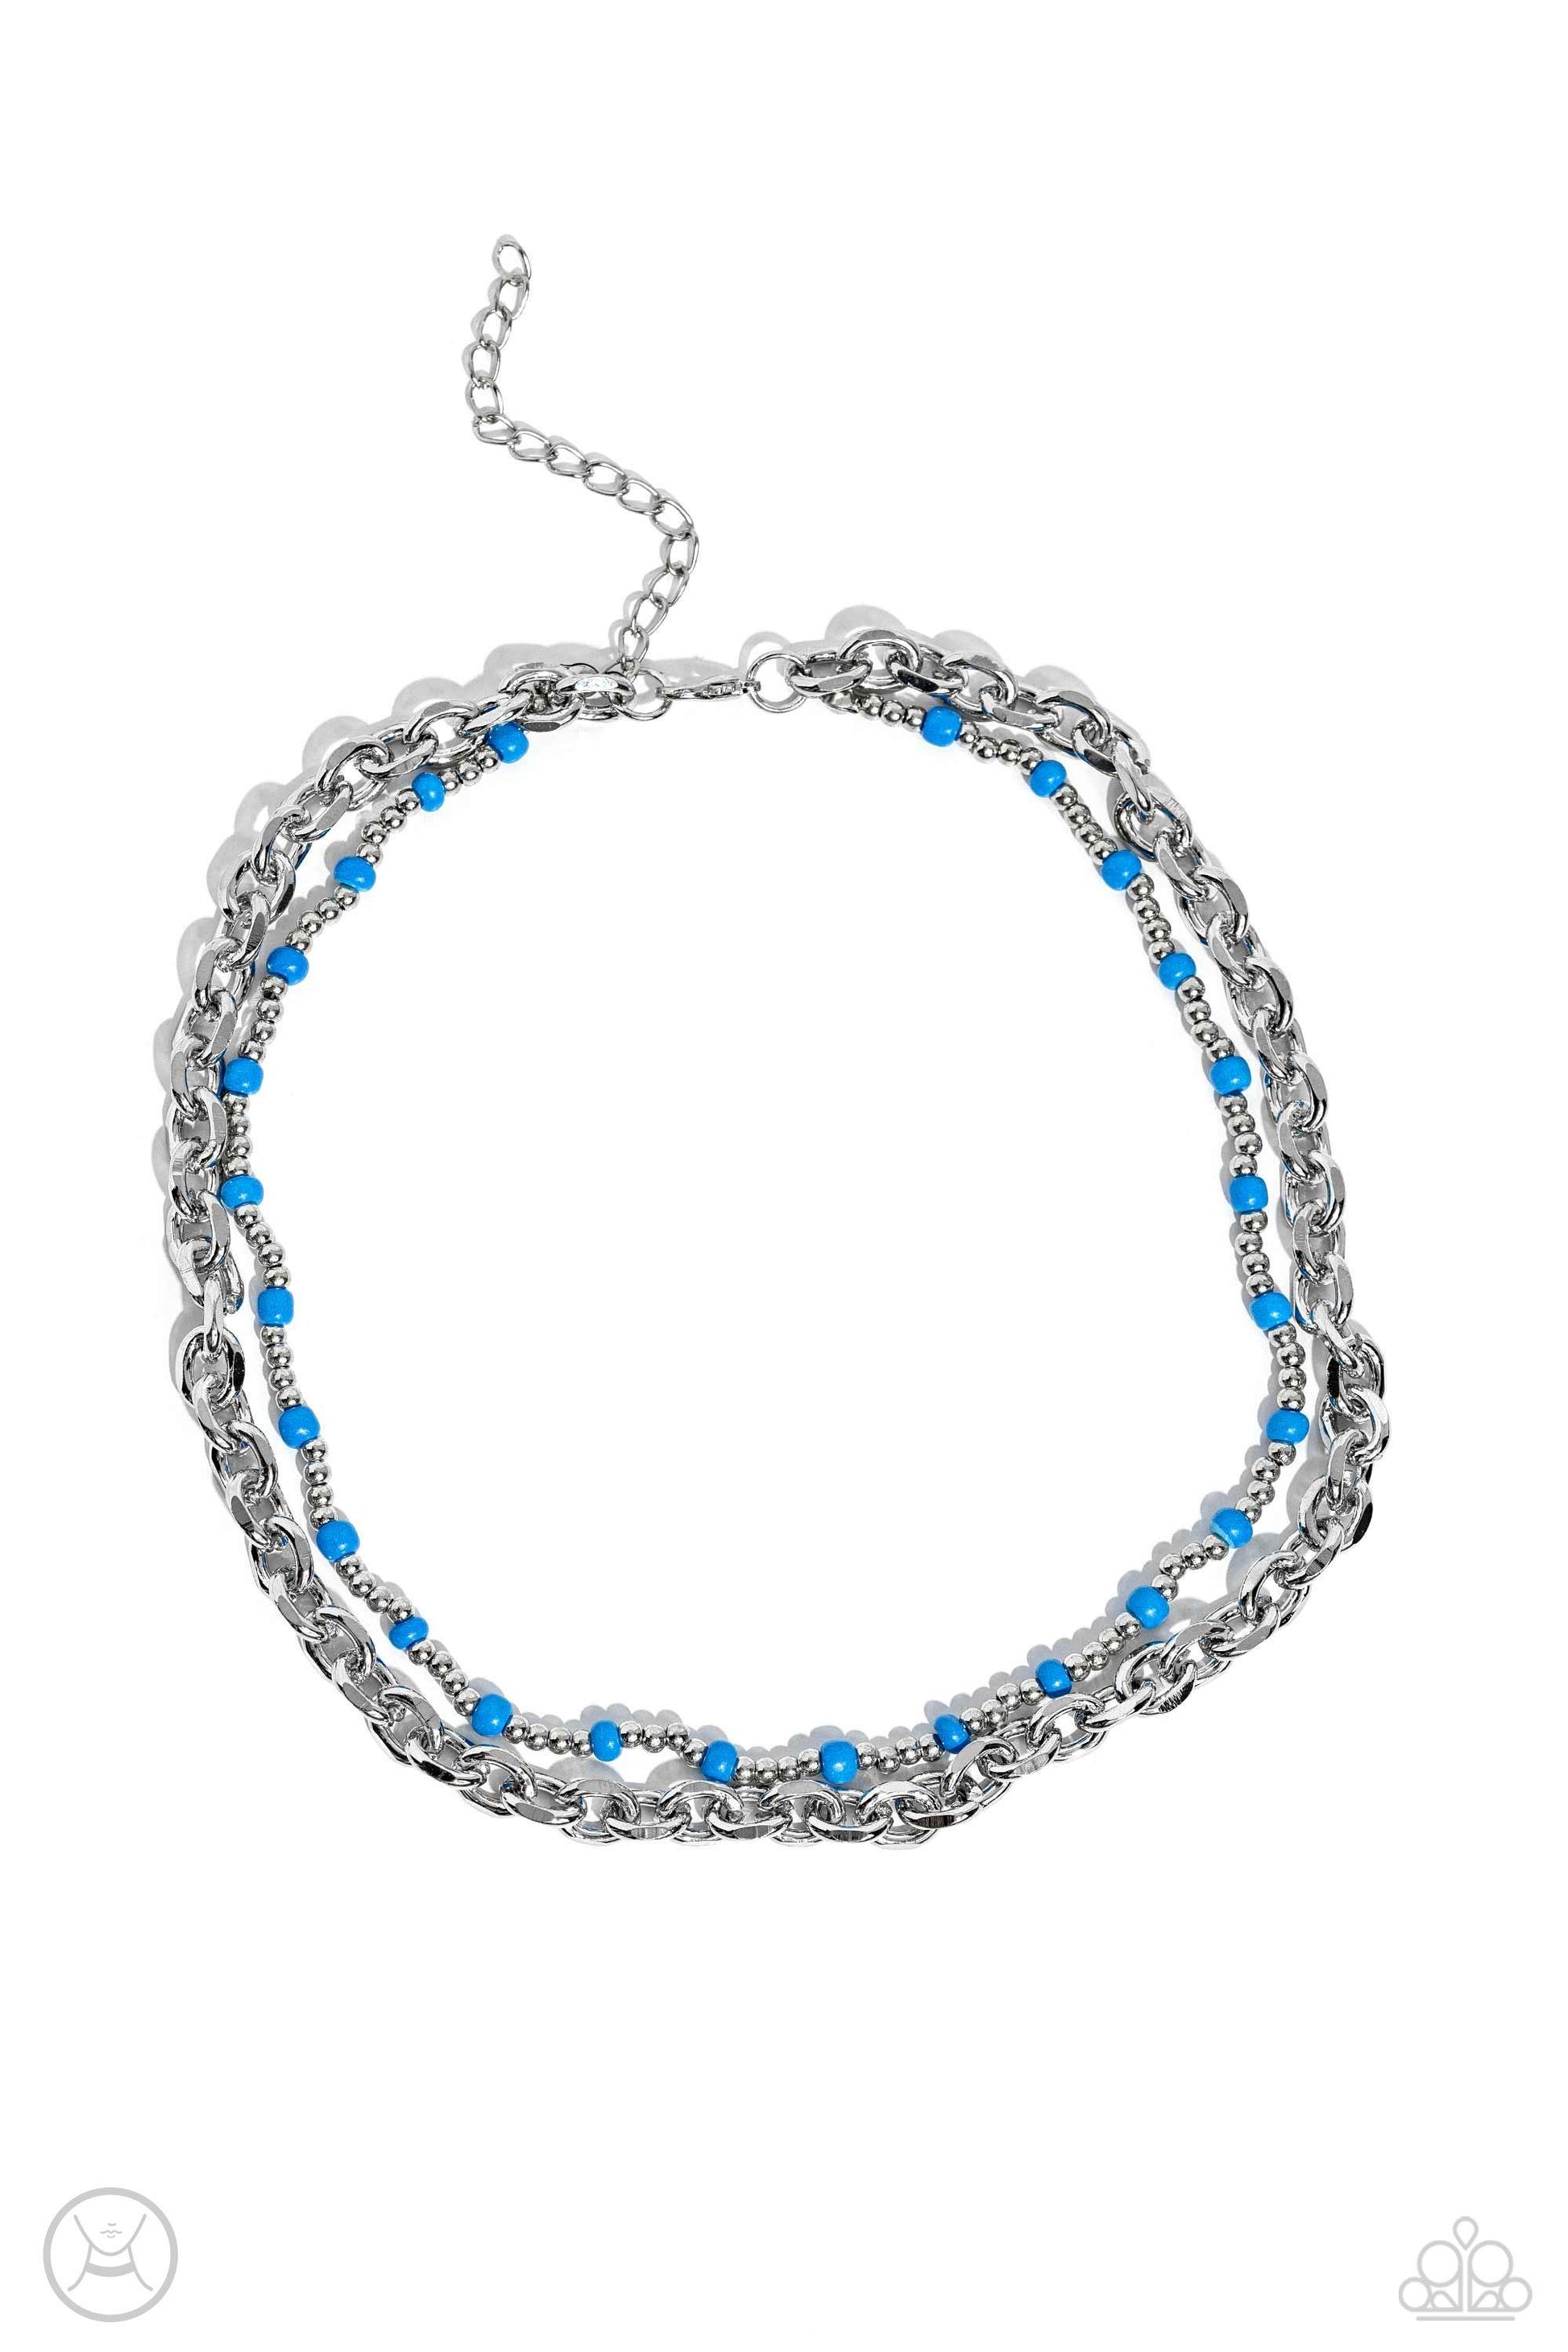 Paparazzi Accessories - A Pop of Color - Blue Choker Necklace - Bling by JessieK